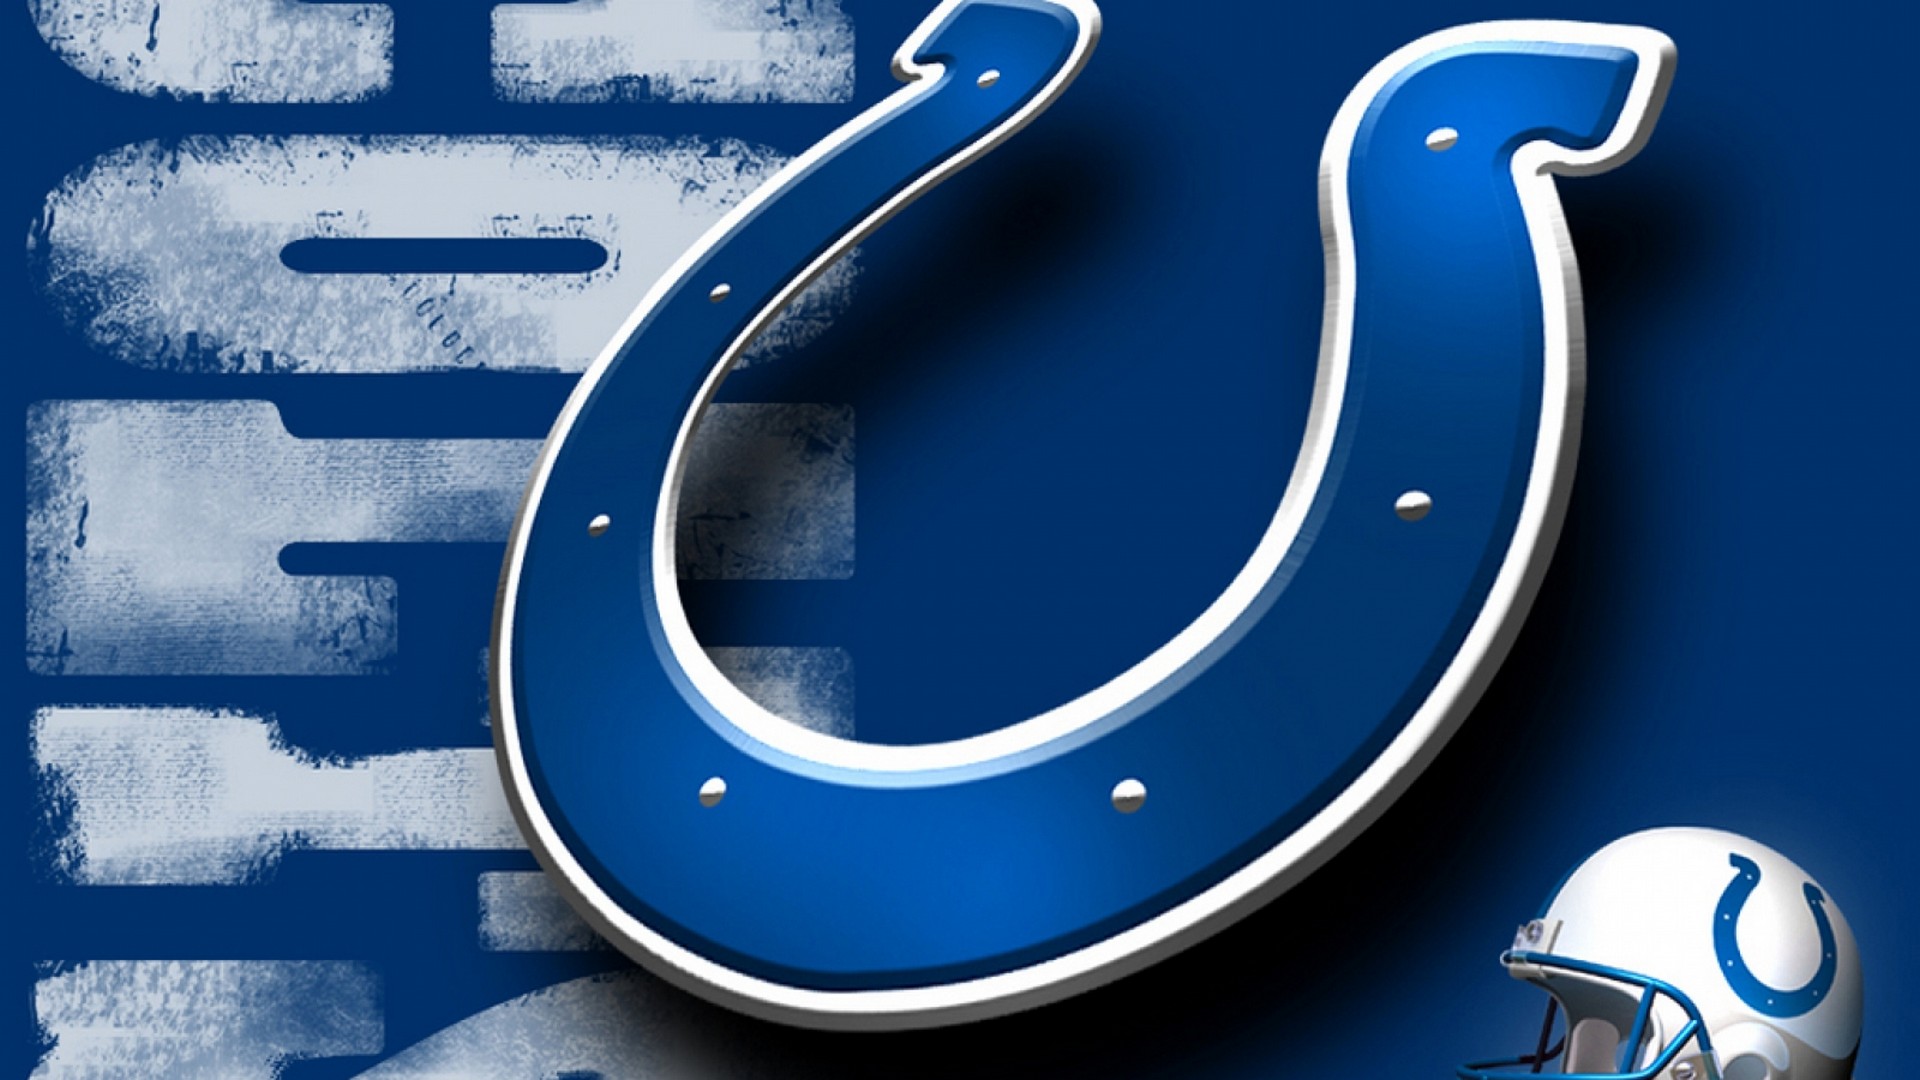 Wallpapers HD Indianapolis Colts NFL With Resolution 1920X1080 pixel. You can make this wallpaper for your Mac or Windows Desktop Background, iPhone, Android or Tablet and another Smartphone device for free